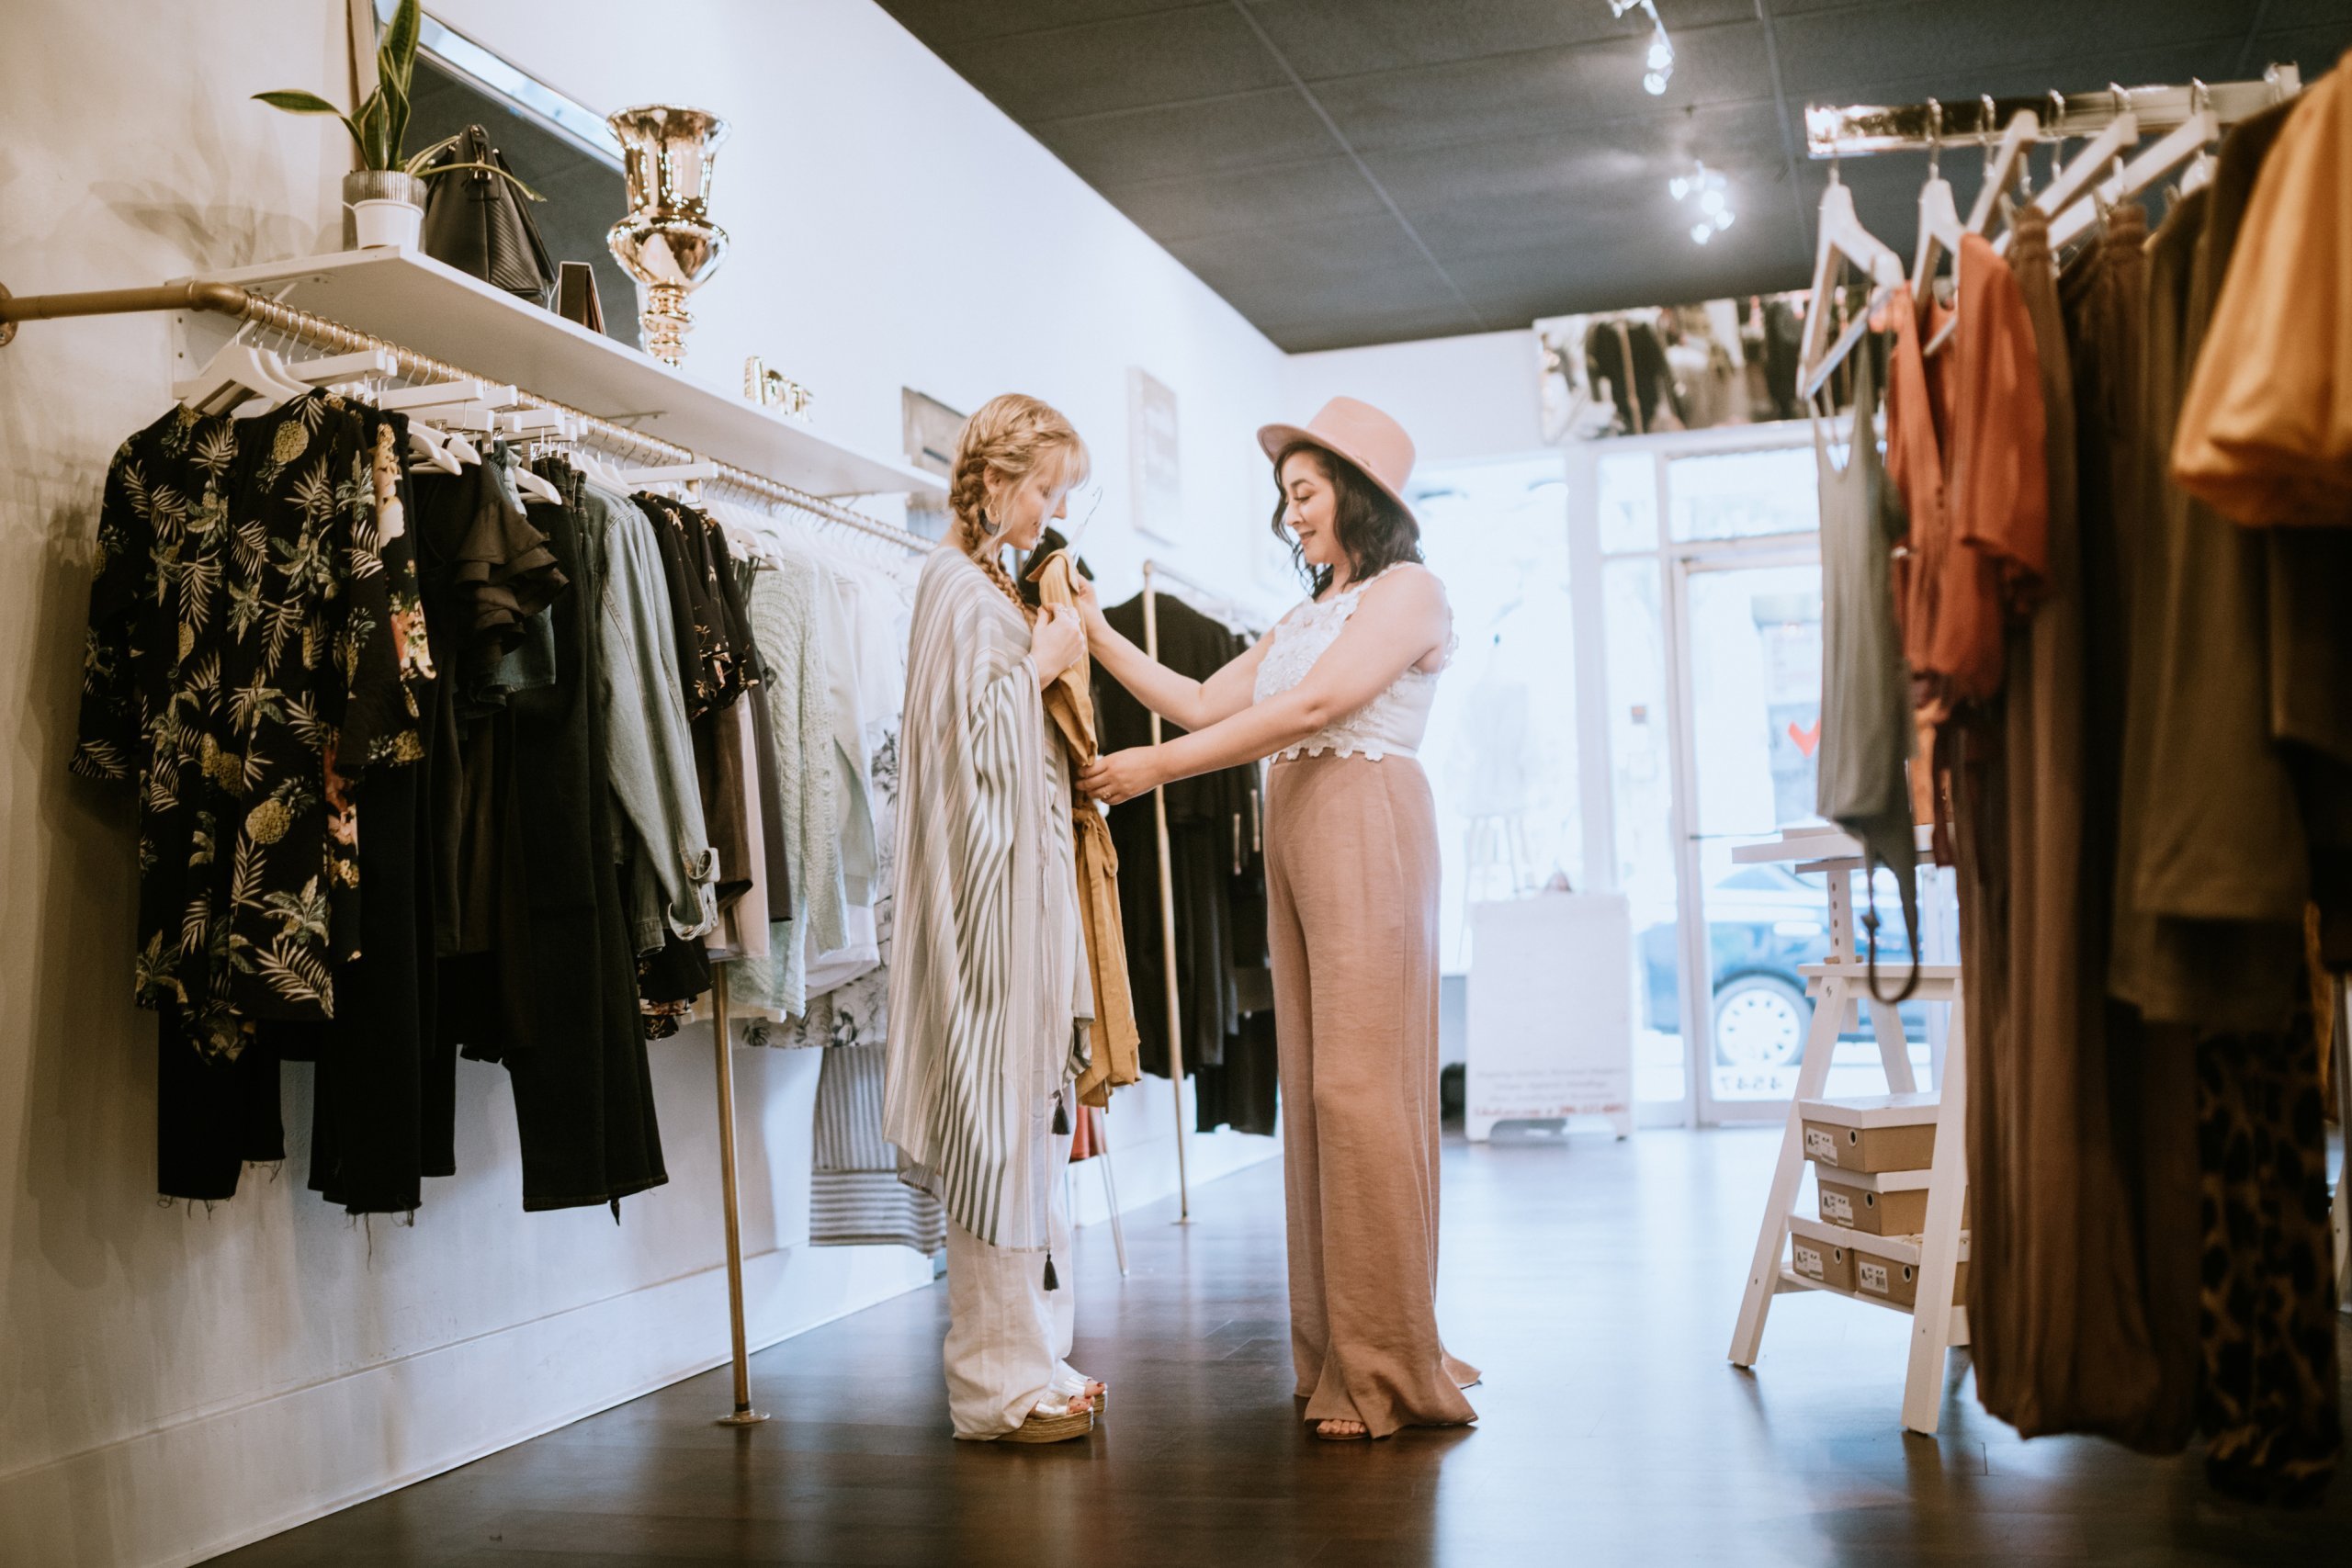 How To Start A Clothing Boutique: 11 Steps For Launching Online Or Offline